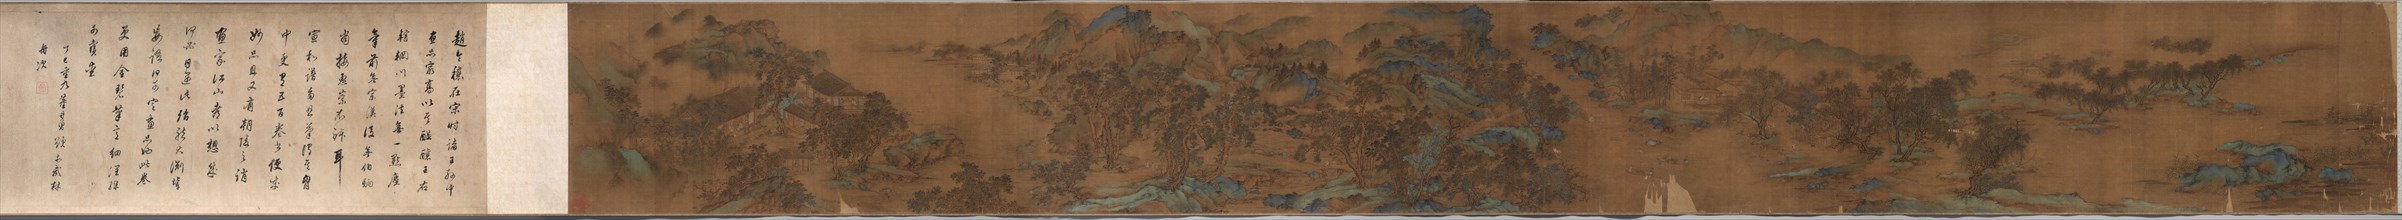 Landscape, 1368- 1644. China, Ming dynasty (1368-1644). Handscroll, ink and slight color on silk;